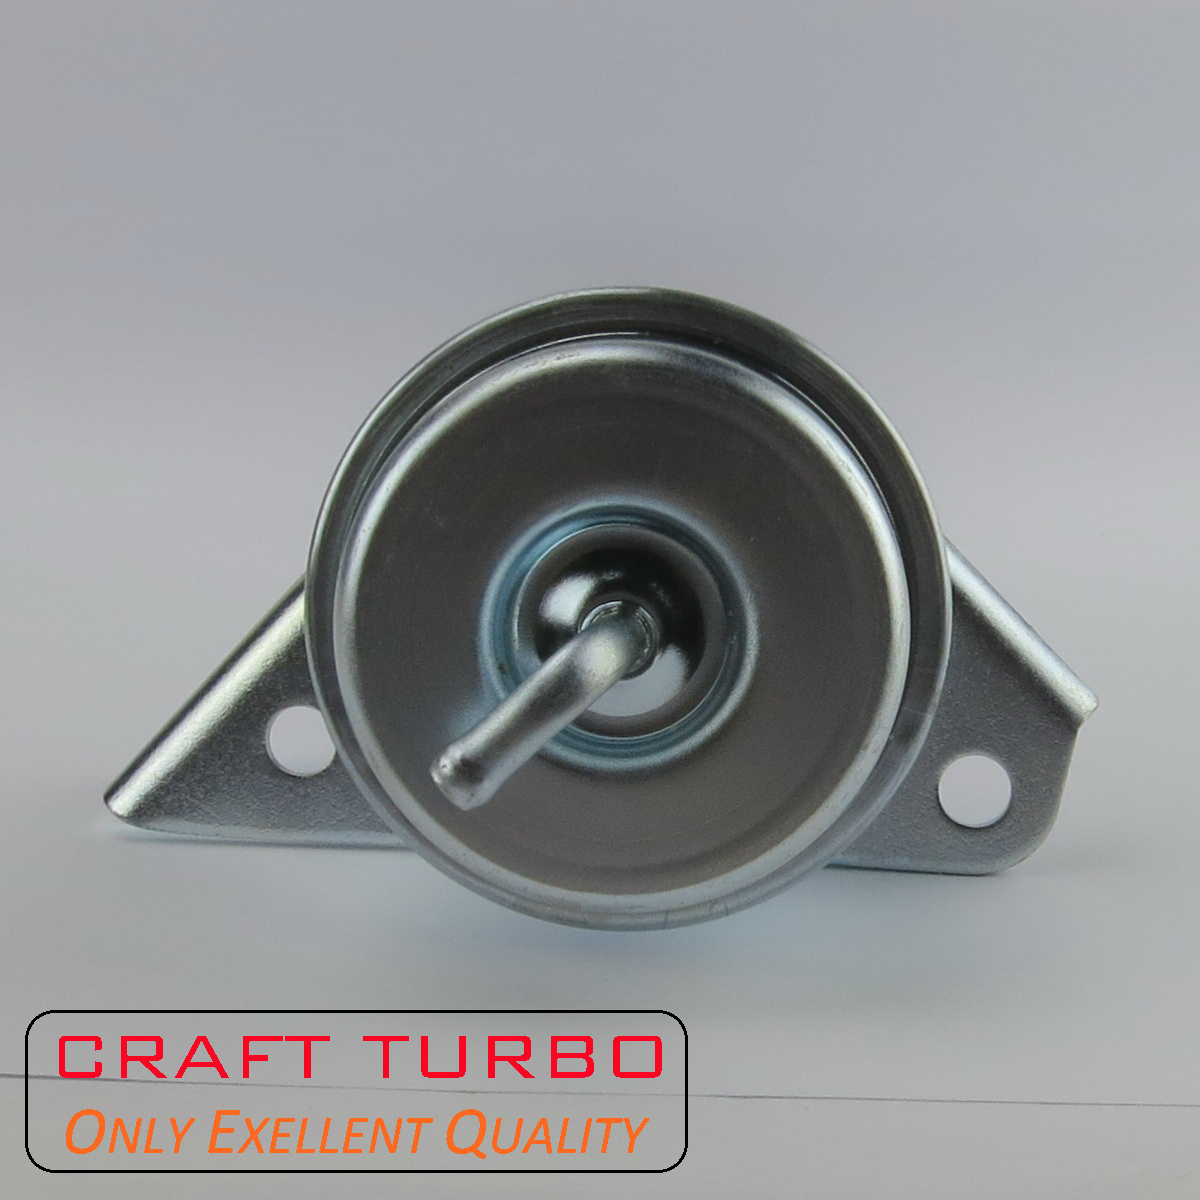 CT26 Actuator for Turbochargers